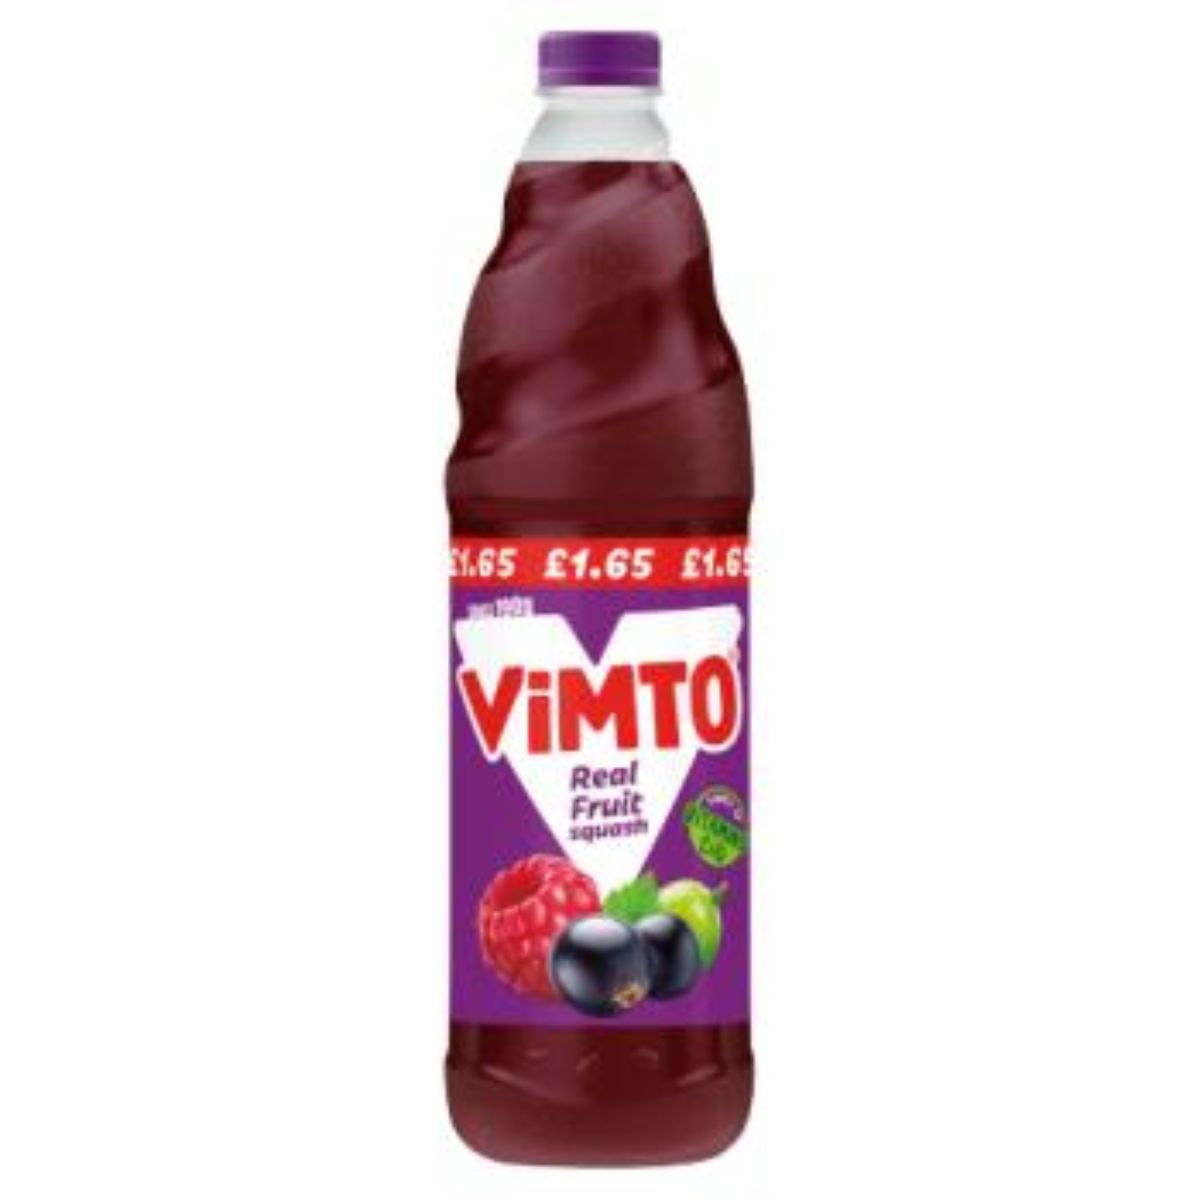 A bottle of Vimto - Real Fruit Squash - 725ml with blackberries and raspberries.